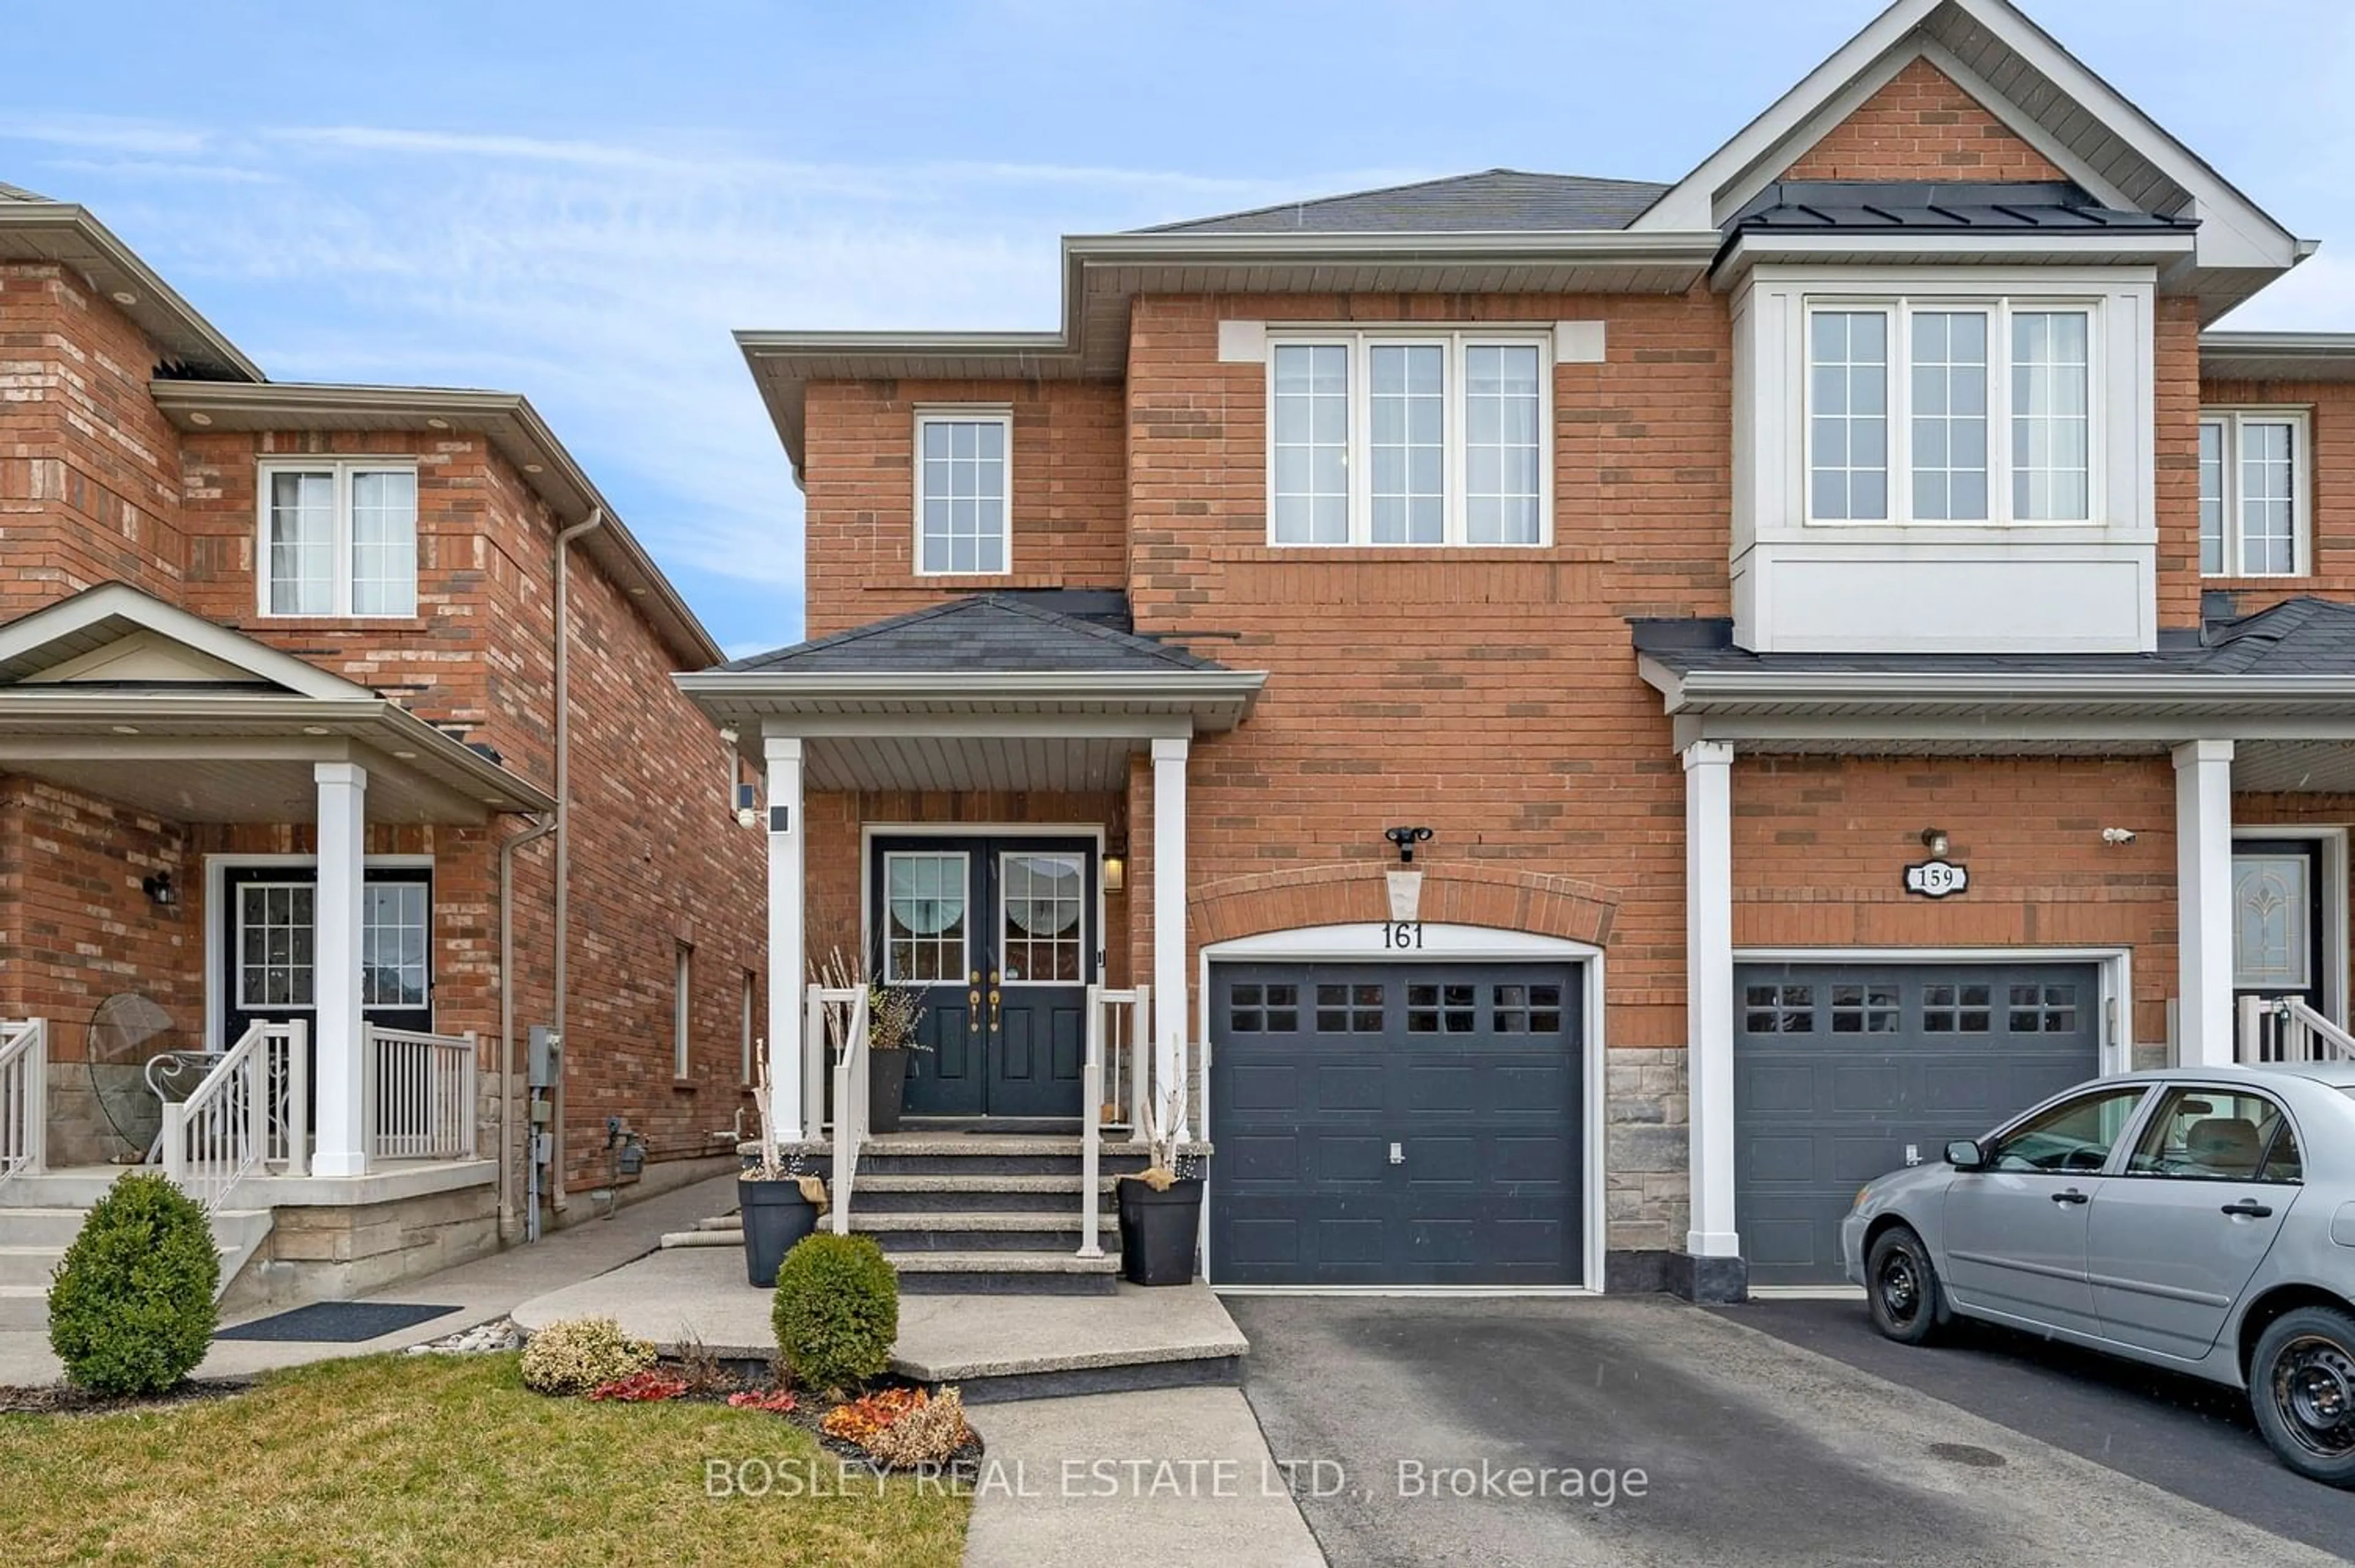 Home with brick exterior material for 161 Heartview Rd, Brampton Ontario L6Z 0G2